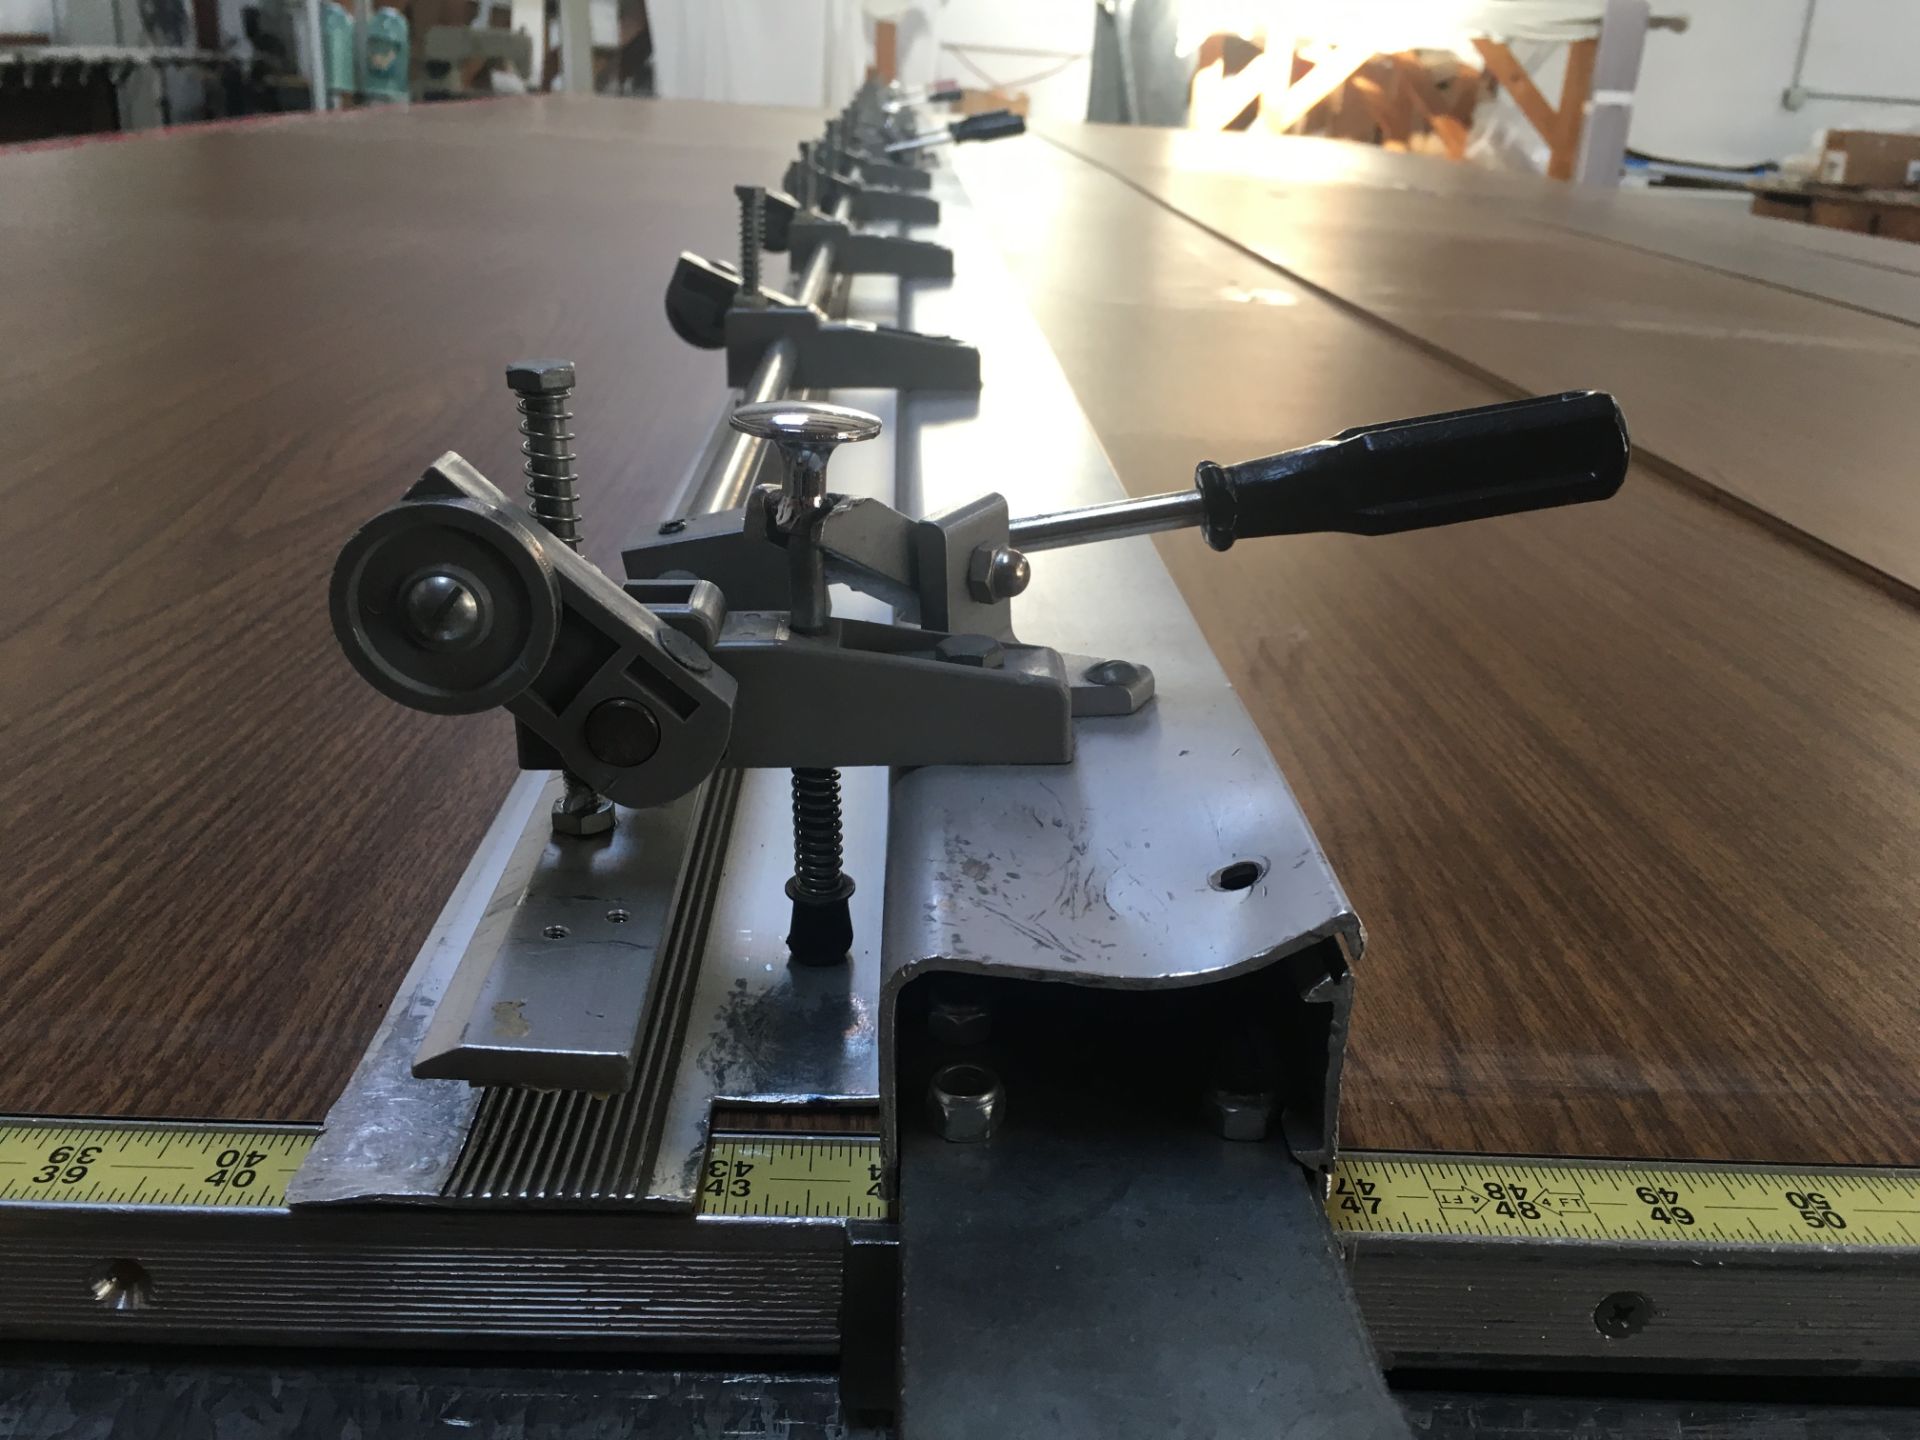 Union Special 56300G Chain stitch Sewing Machine with 9' x 20' Layout Table - Image 4 of 4